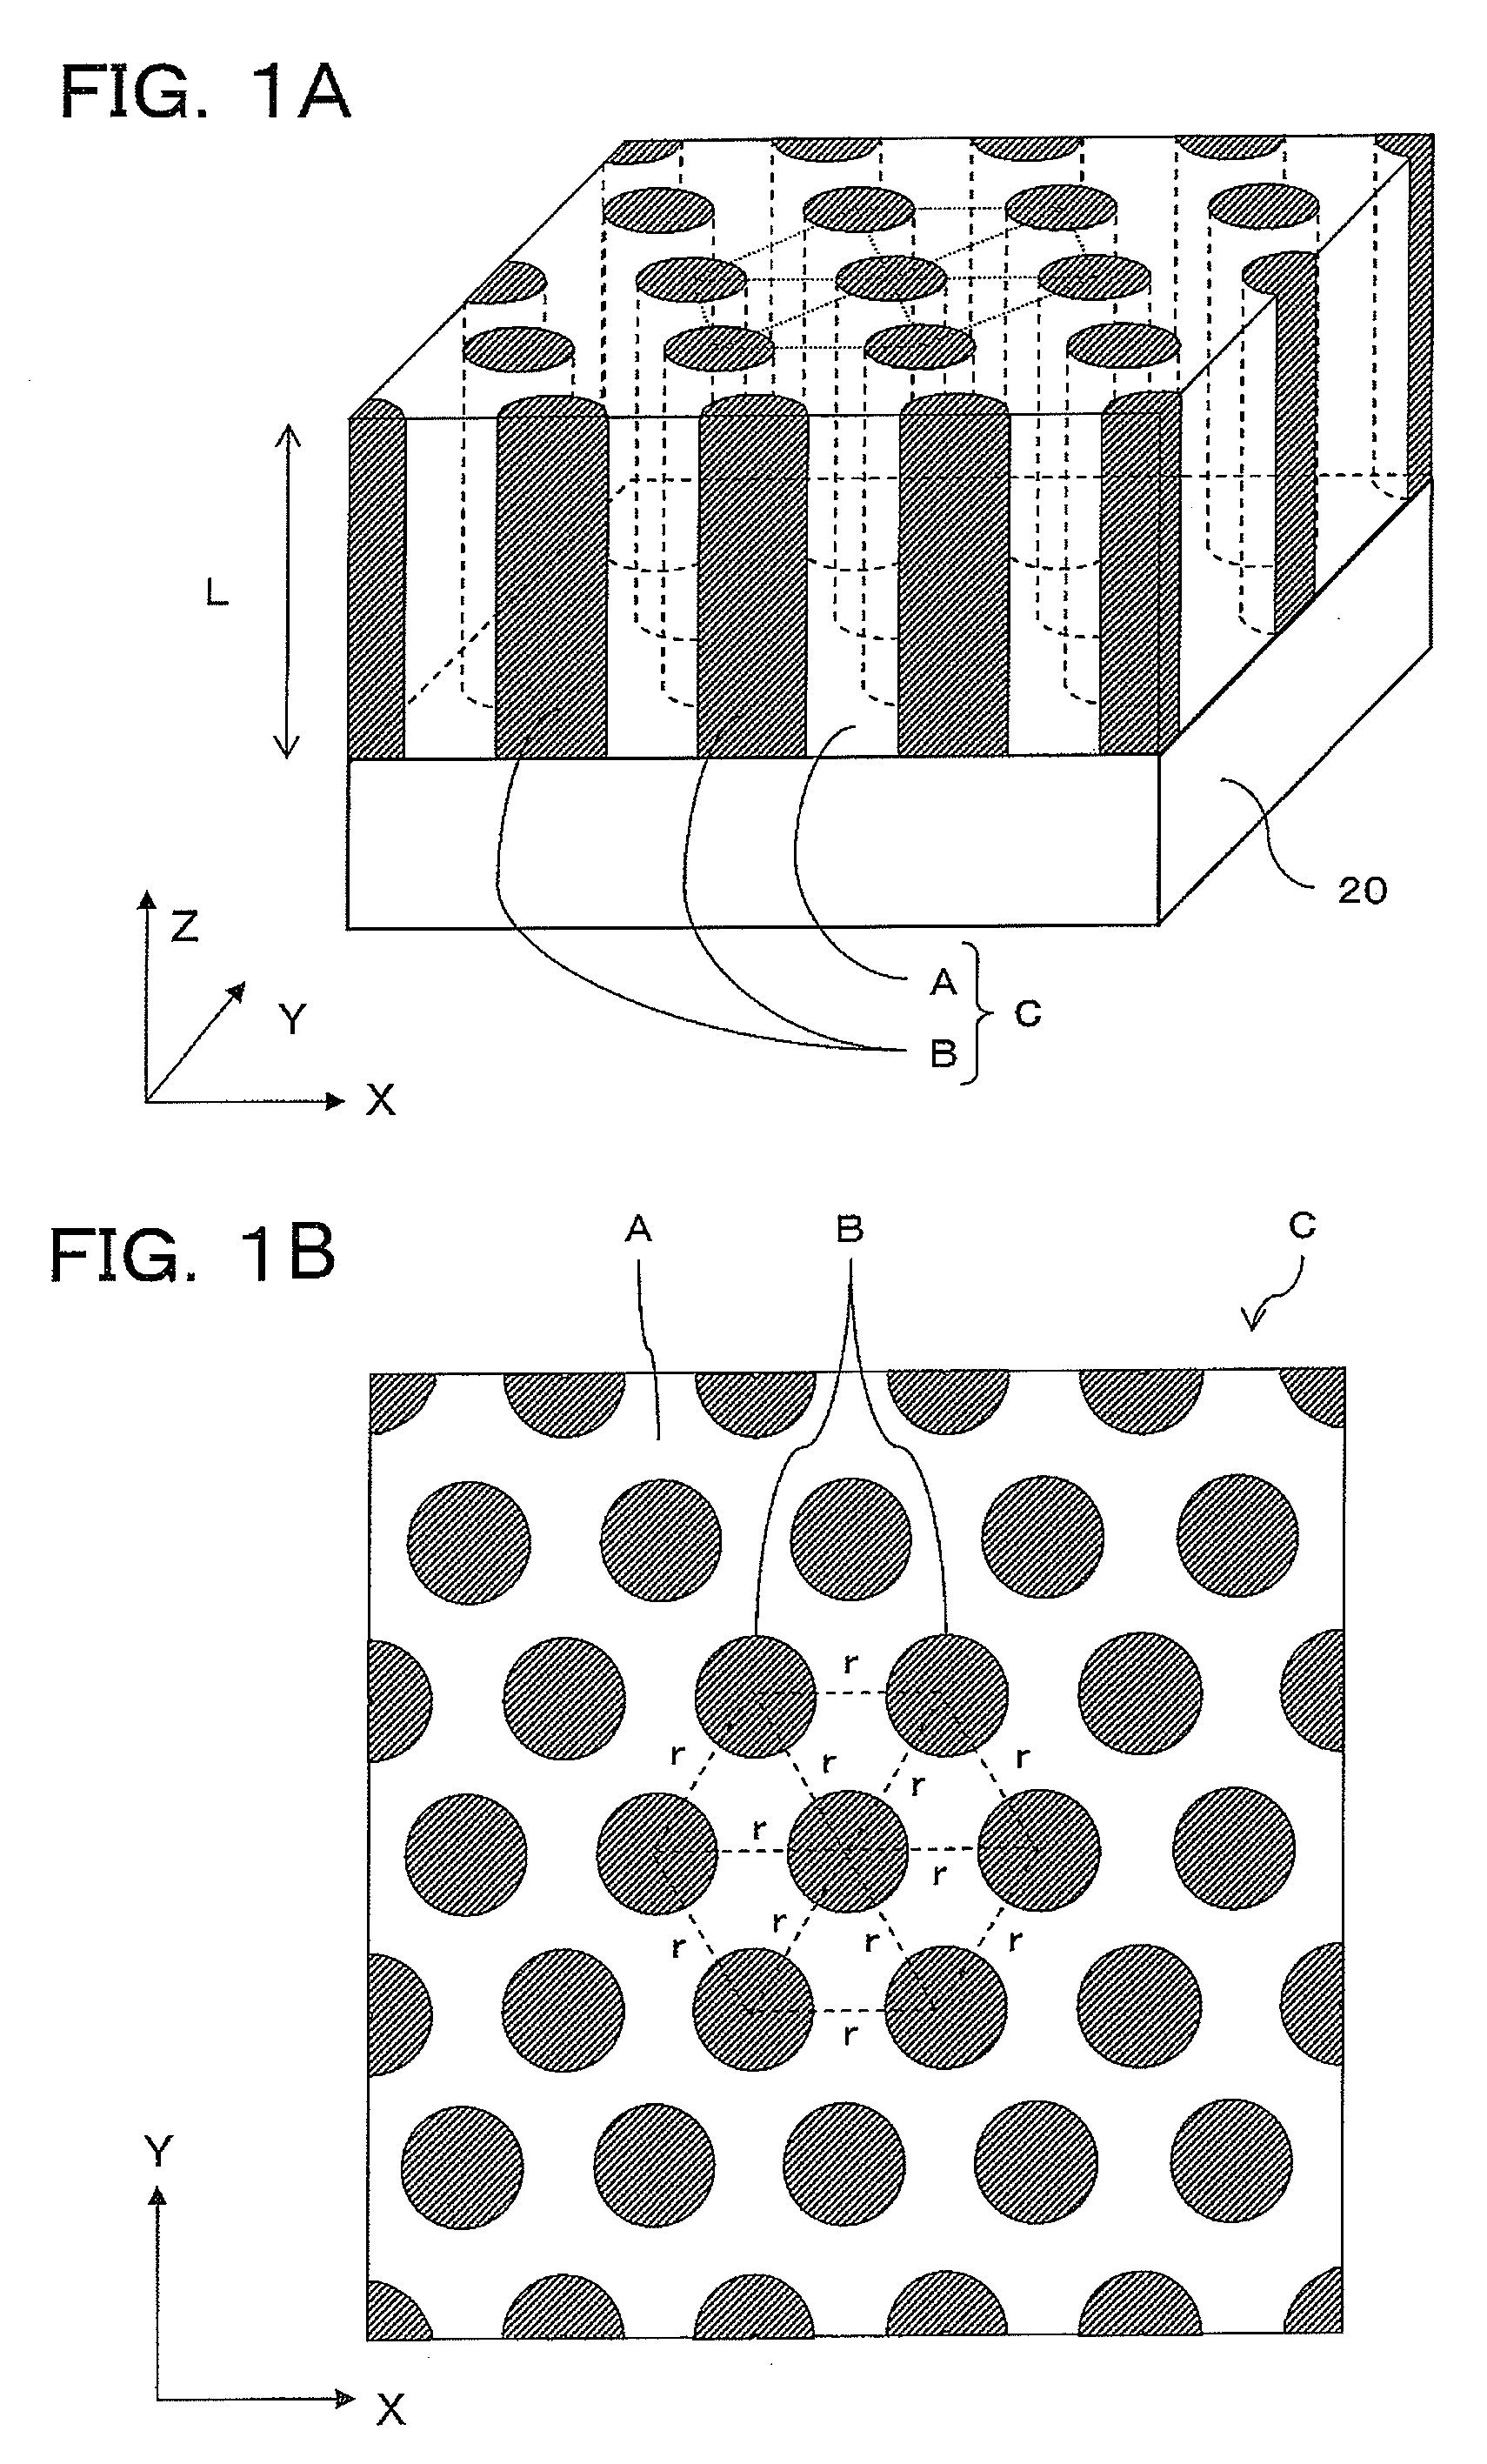 Polymer Thin Film, Patterned Substrate, Patterned Medium for Magnetic Recording, and Method of Manufacturing these Articles